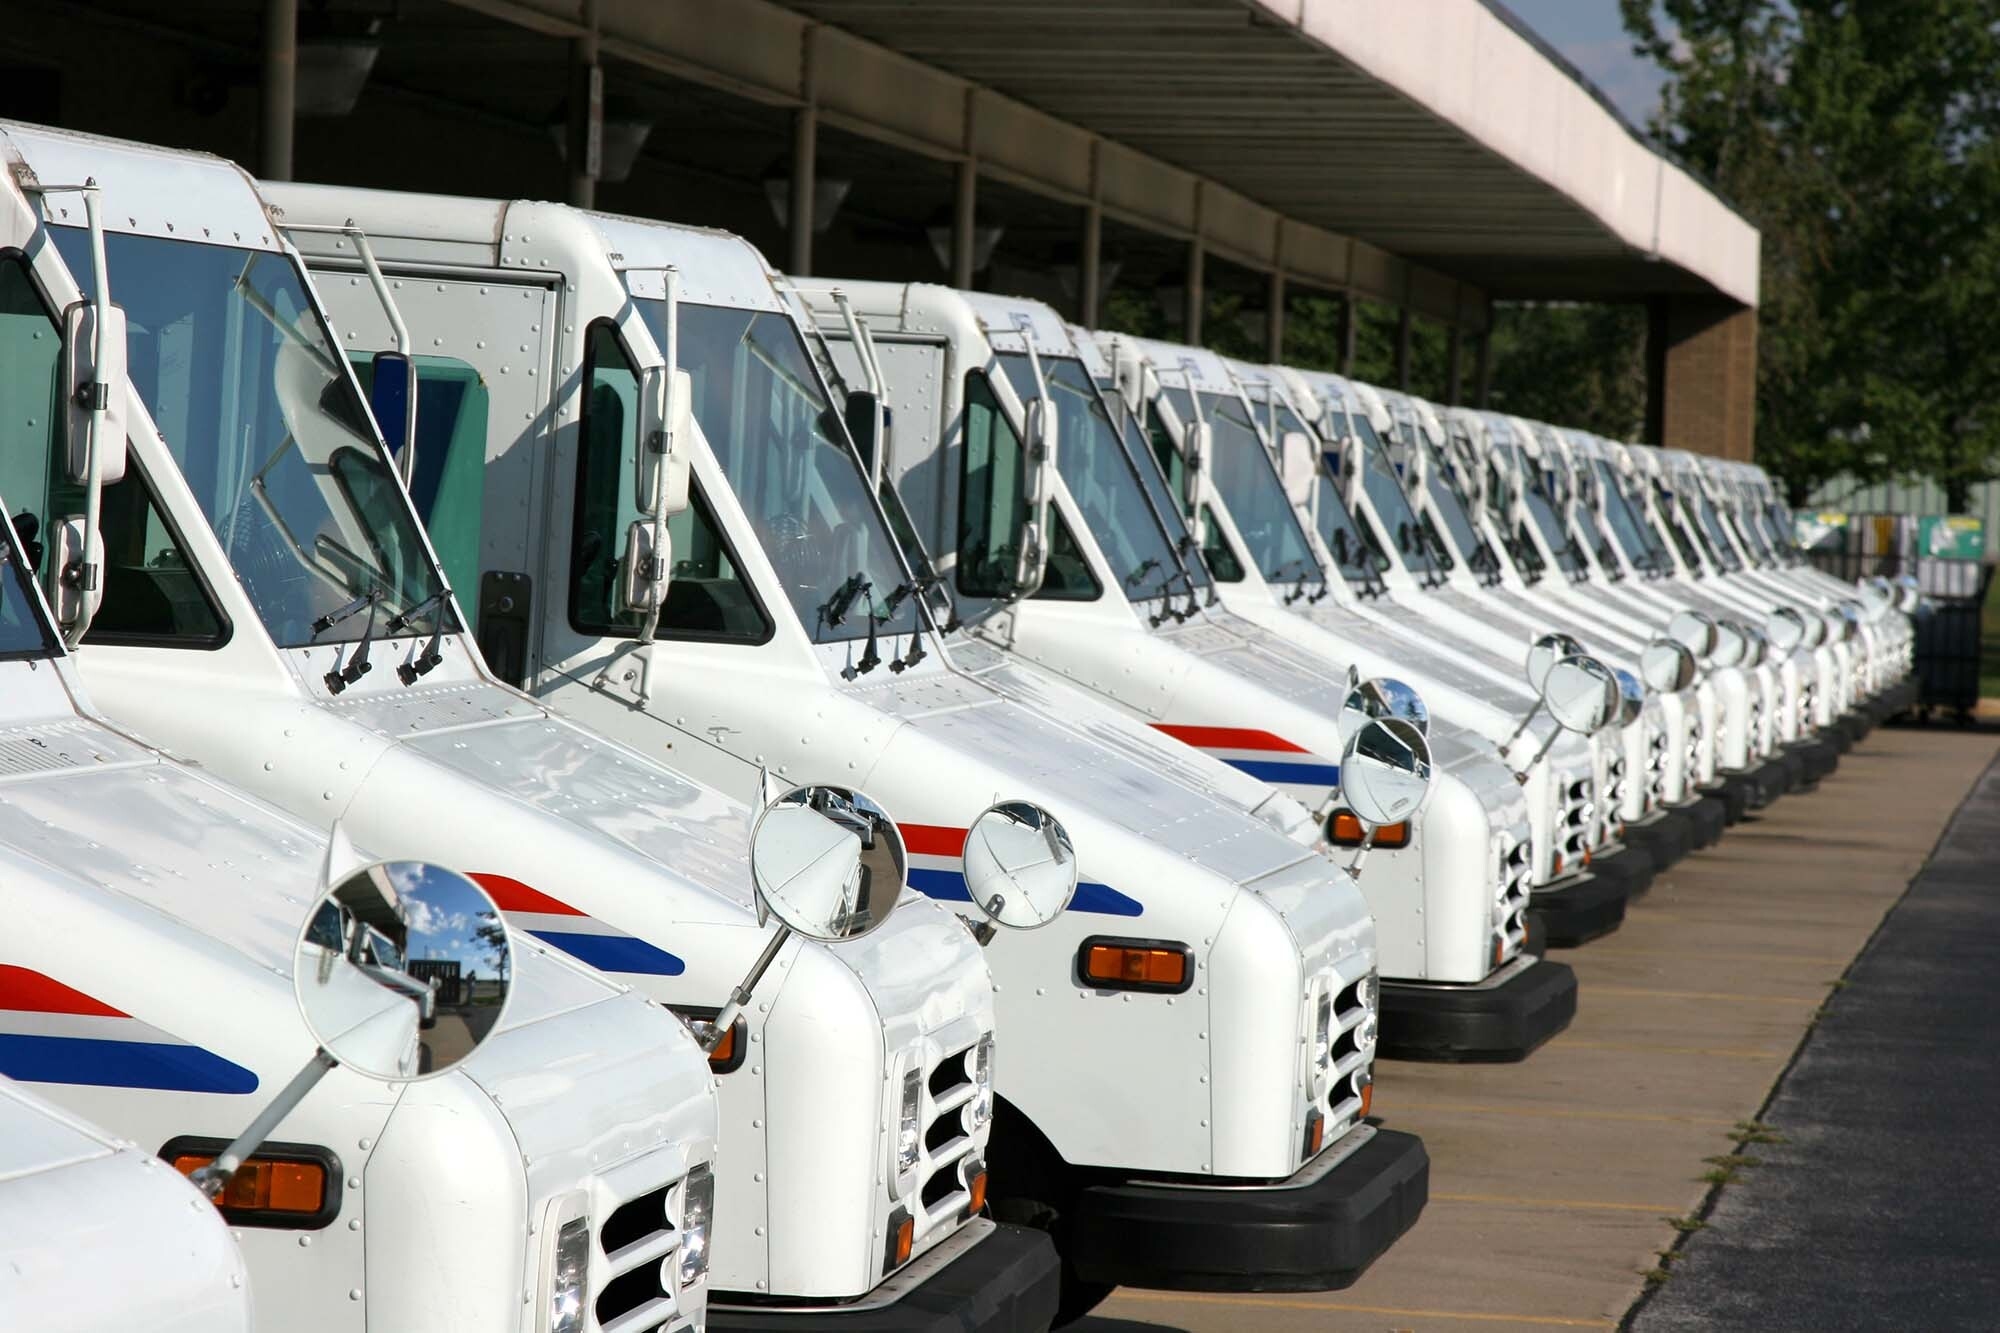 More than a dozen United States Postal Services delivery vehicles lined up under the canopy of a Postal Service building.